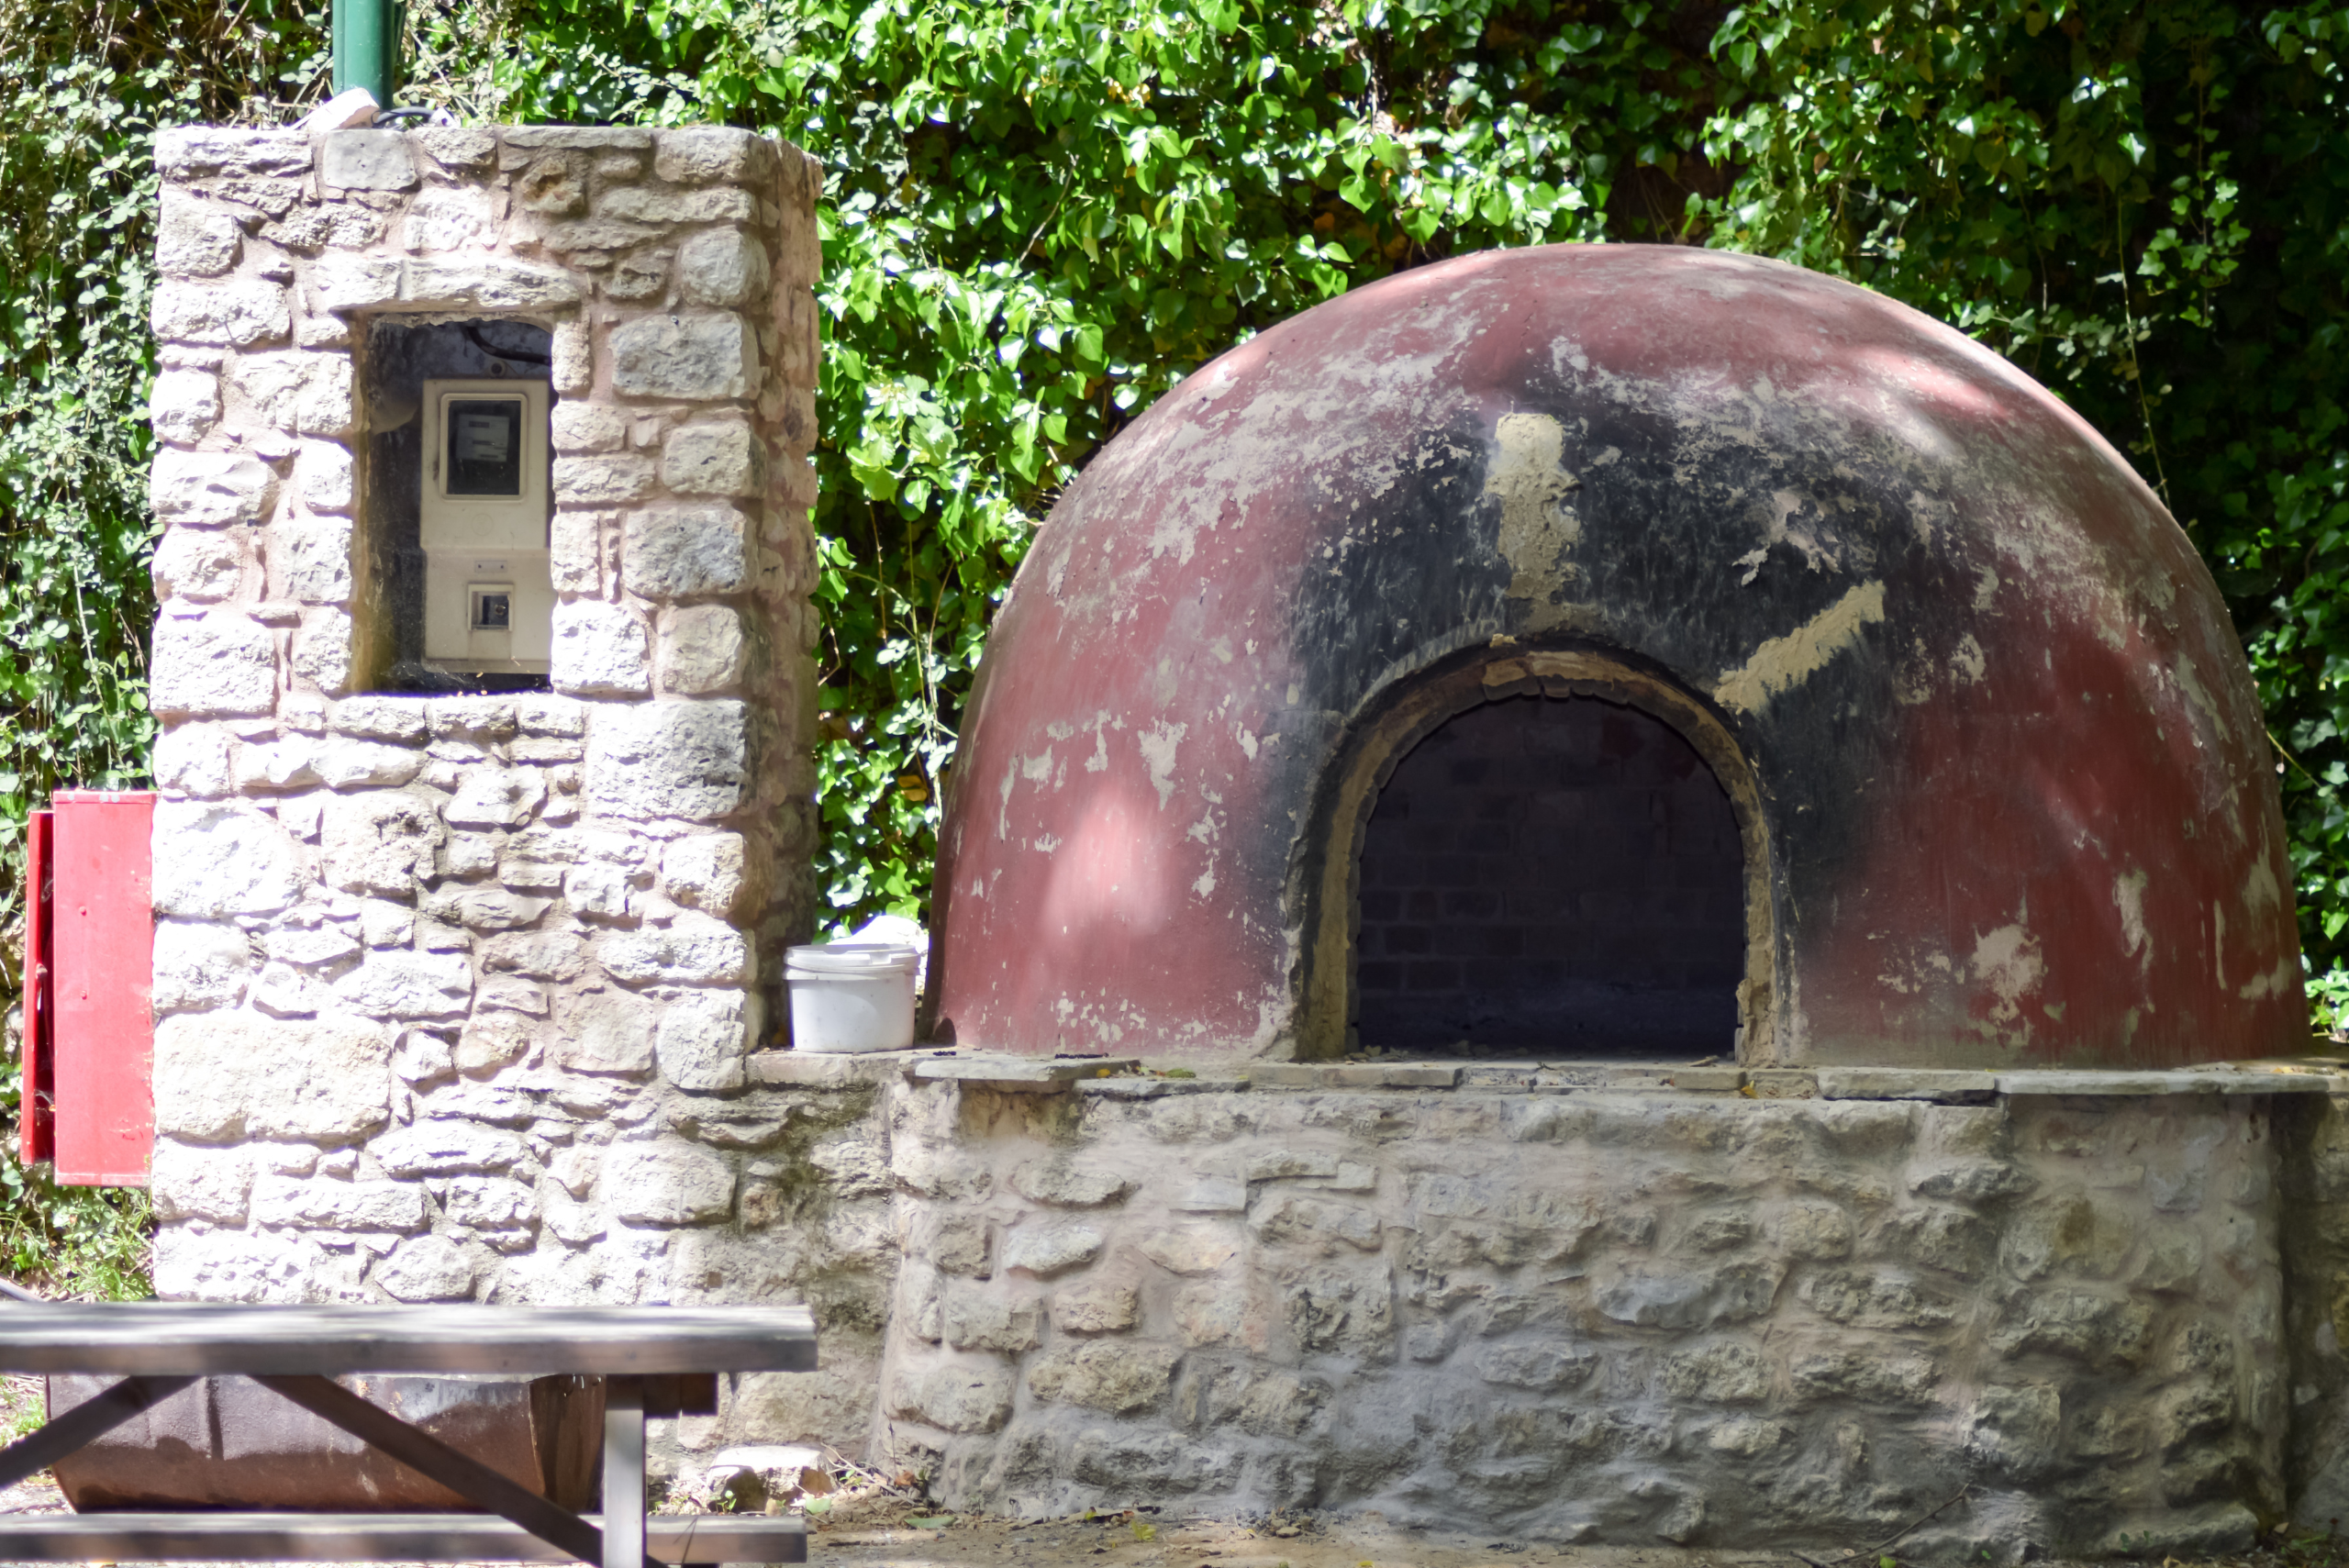 DIY outdoor pizza oven with dome.